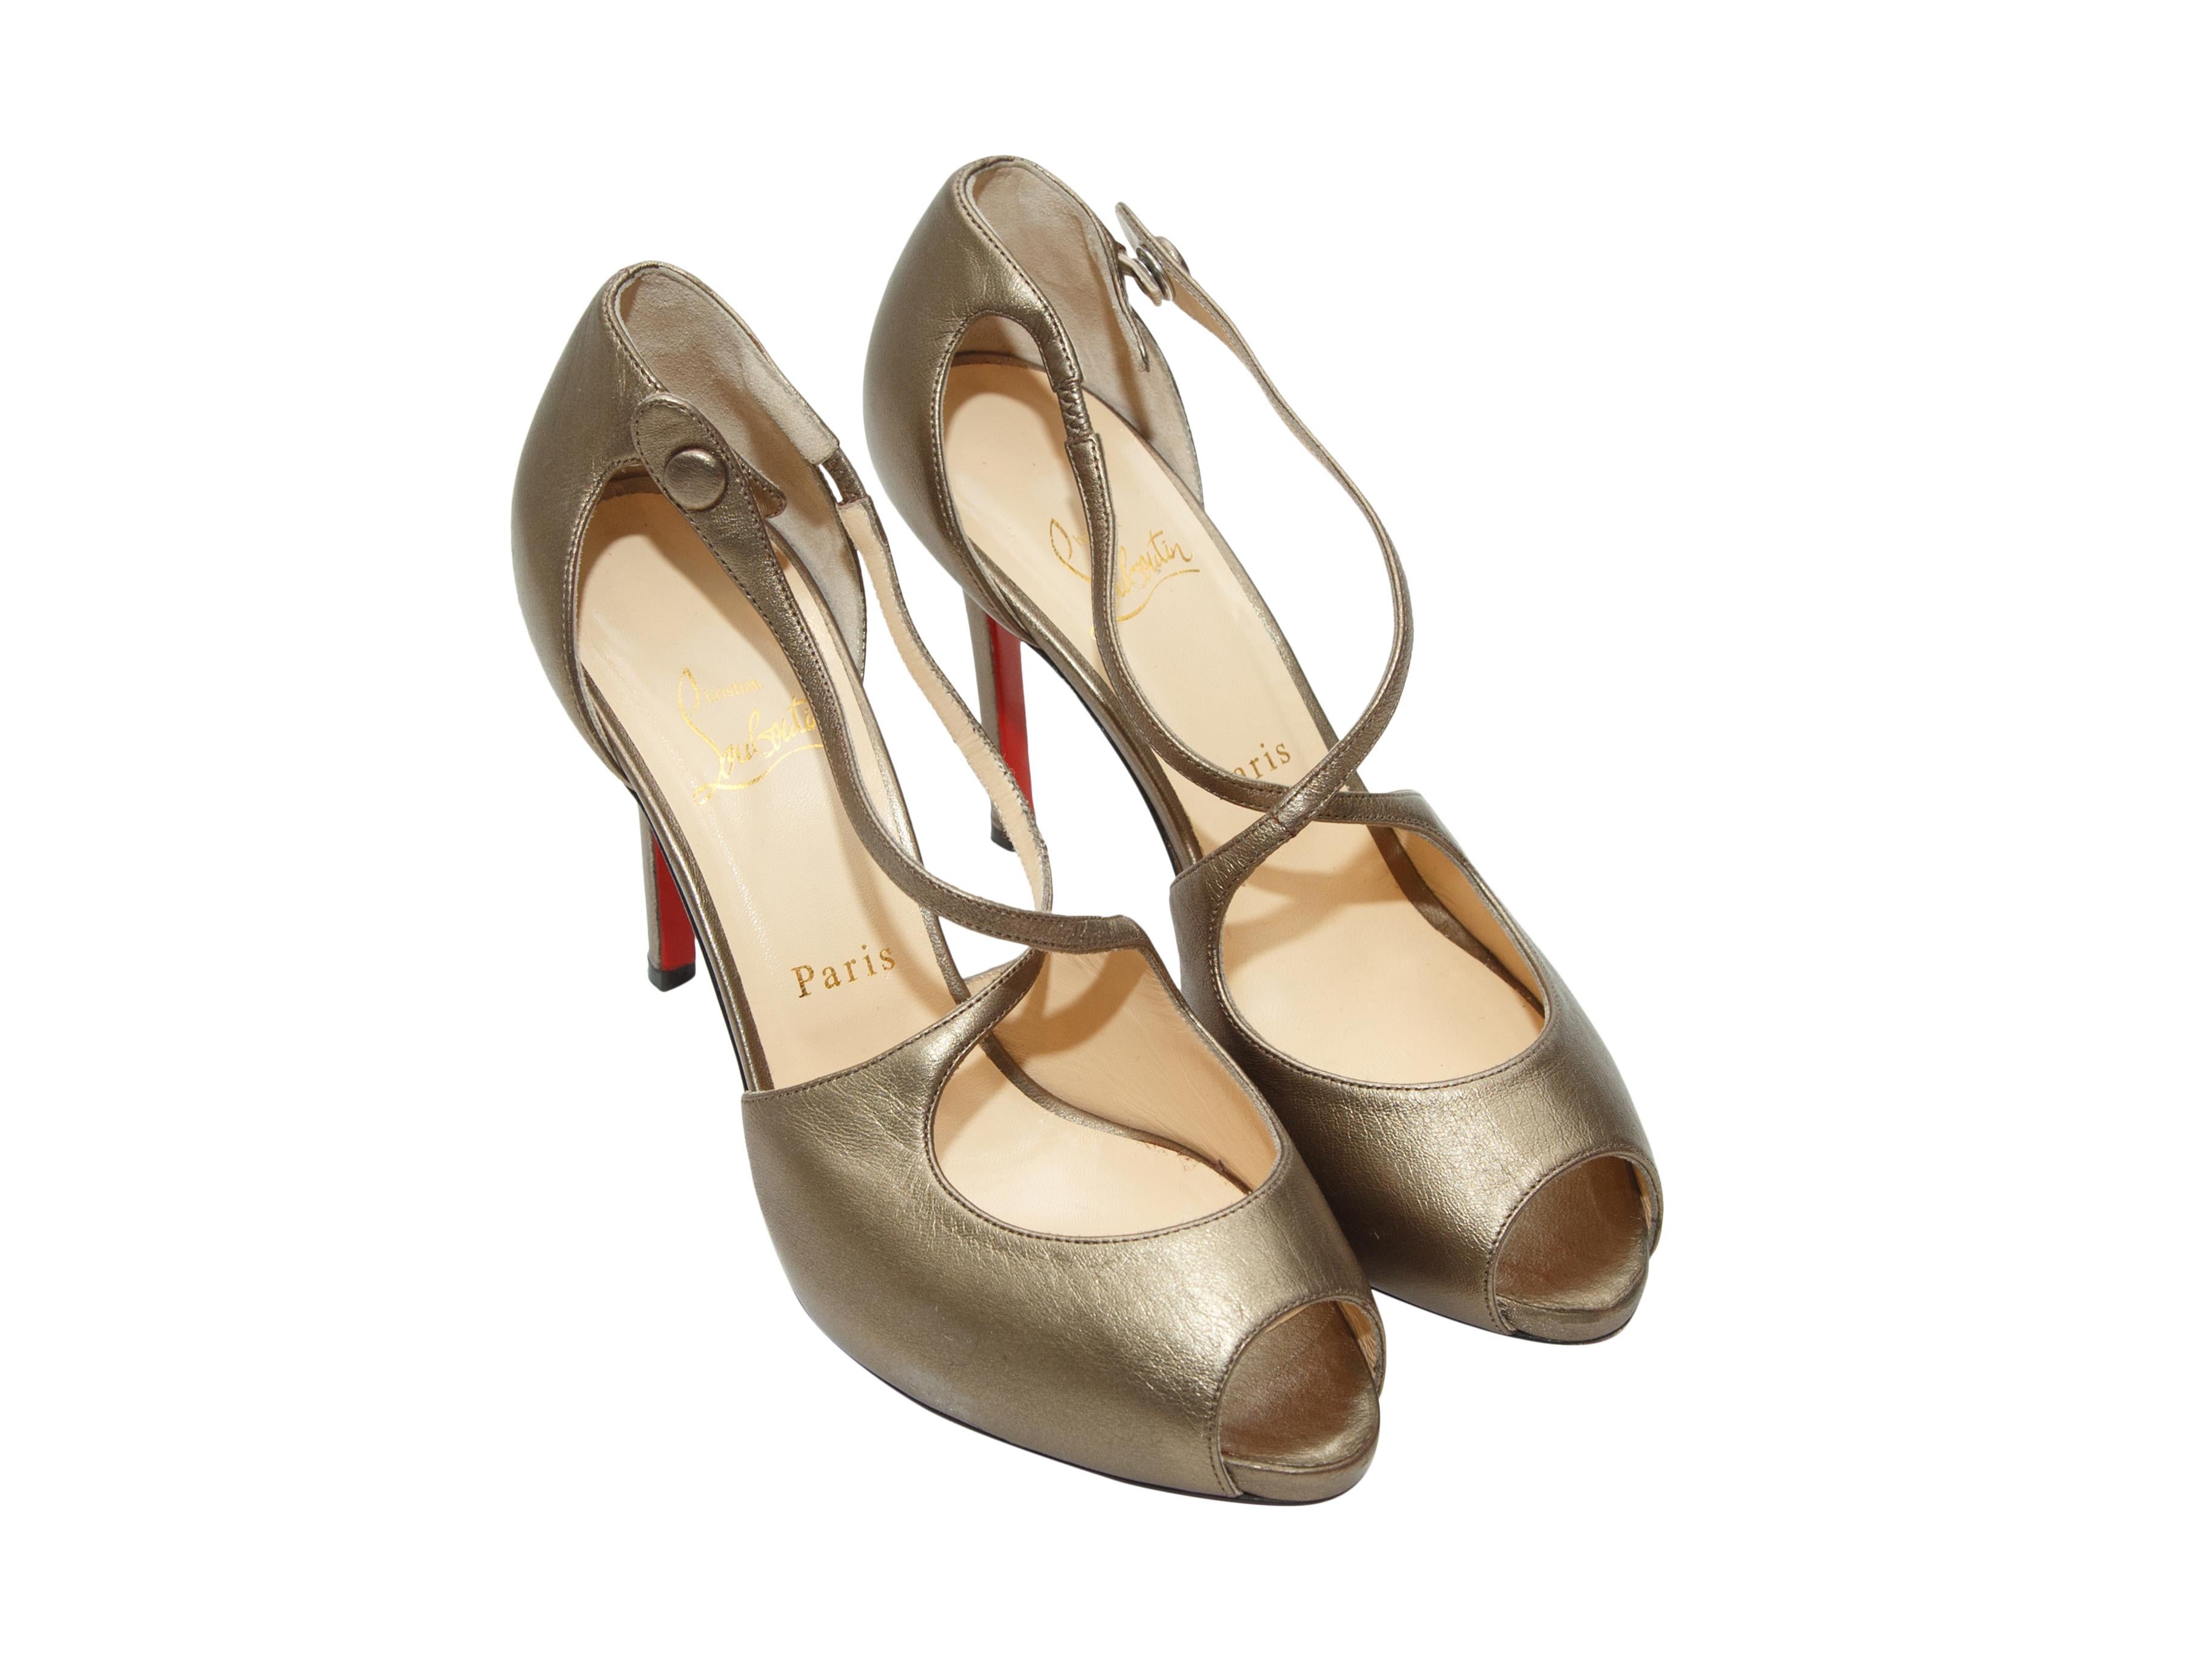 Product details: Gold metallic peep-toe pumps by Christian Louboutin. Crossover straps. Covered heels. Designer size 39. 4